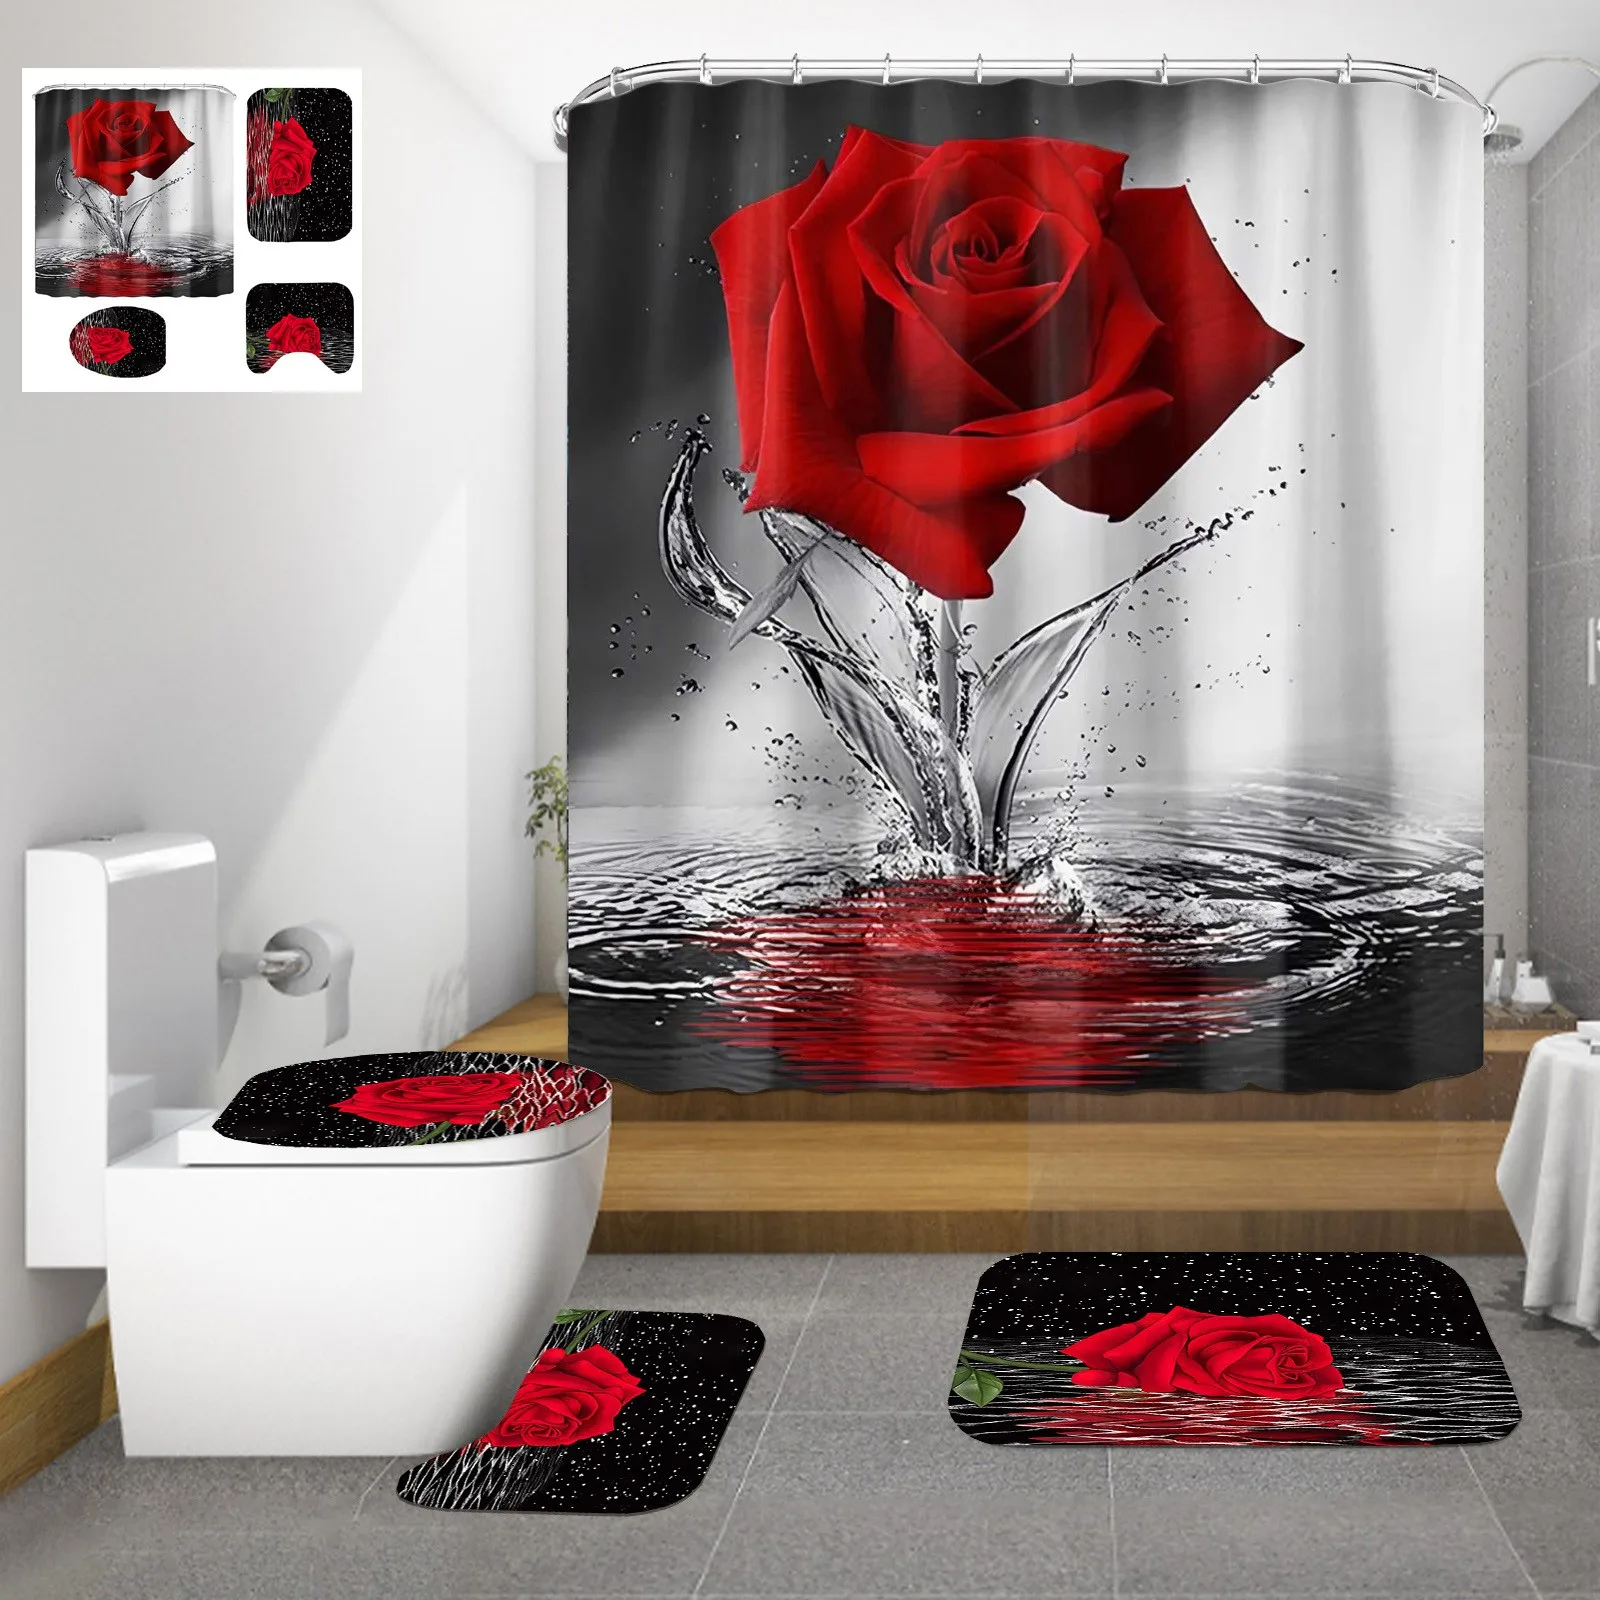 Details about   Coral Snake Shower Curtain Abstract embroidery Red Rose Bathroom Accessory Sets 